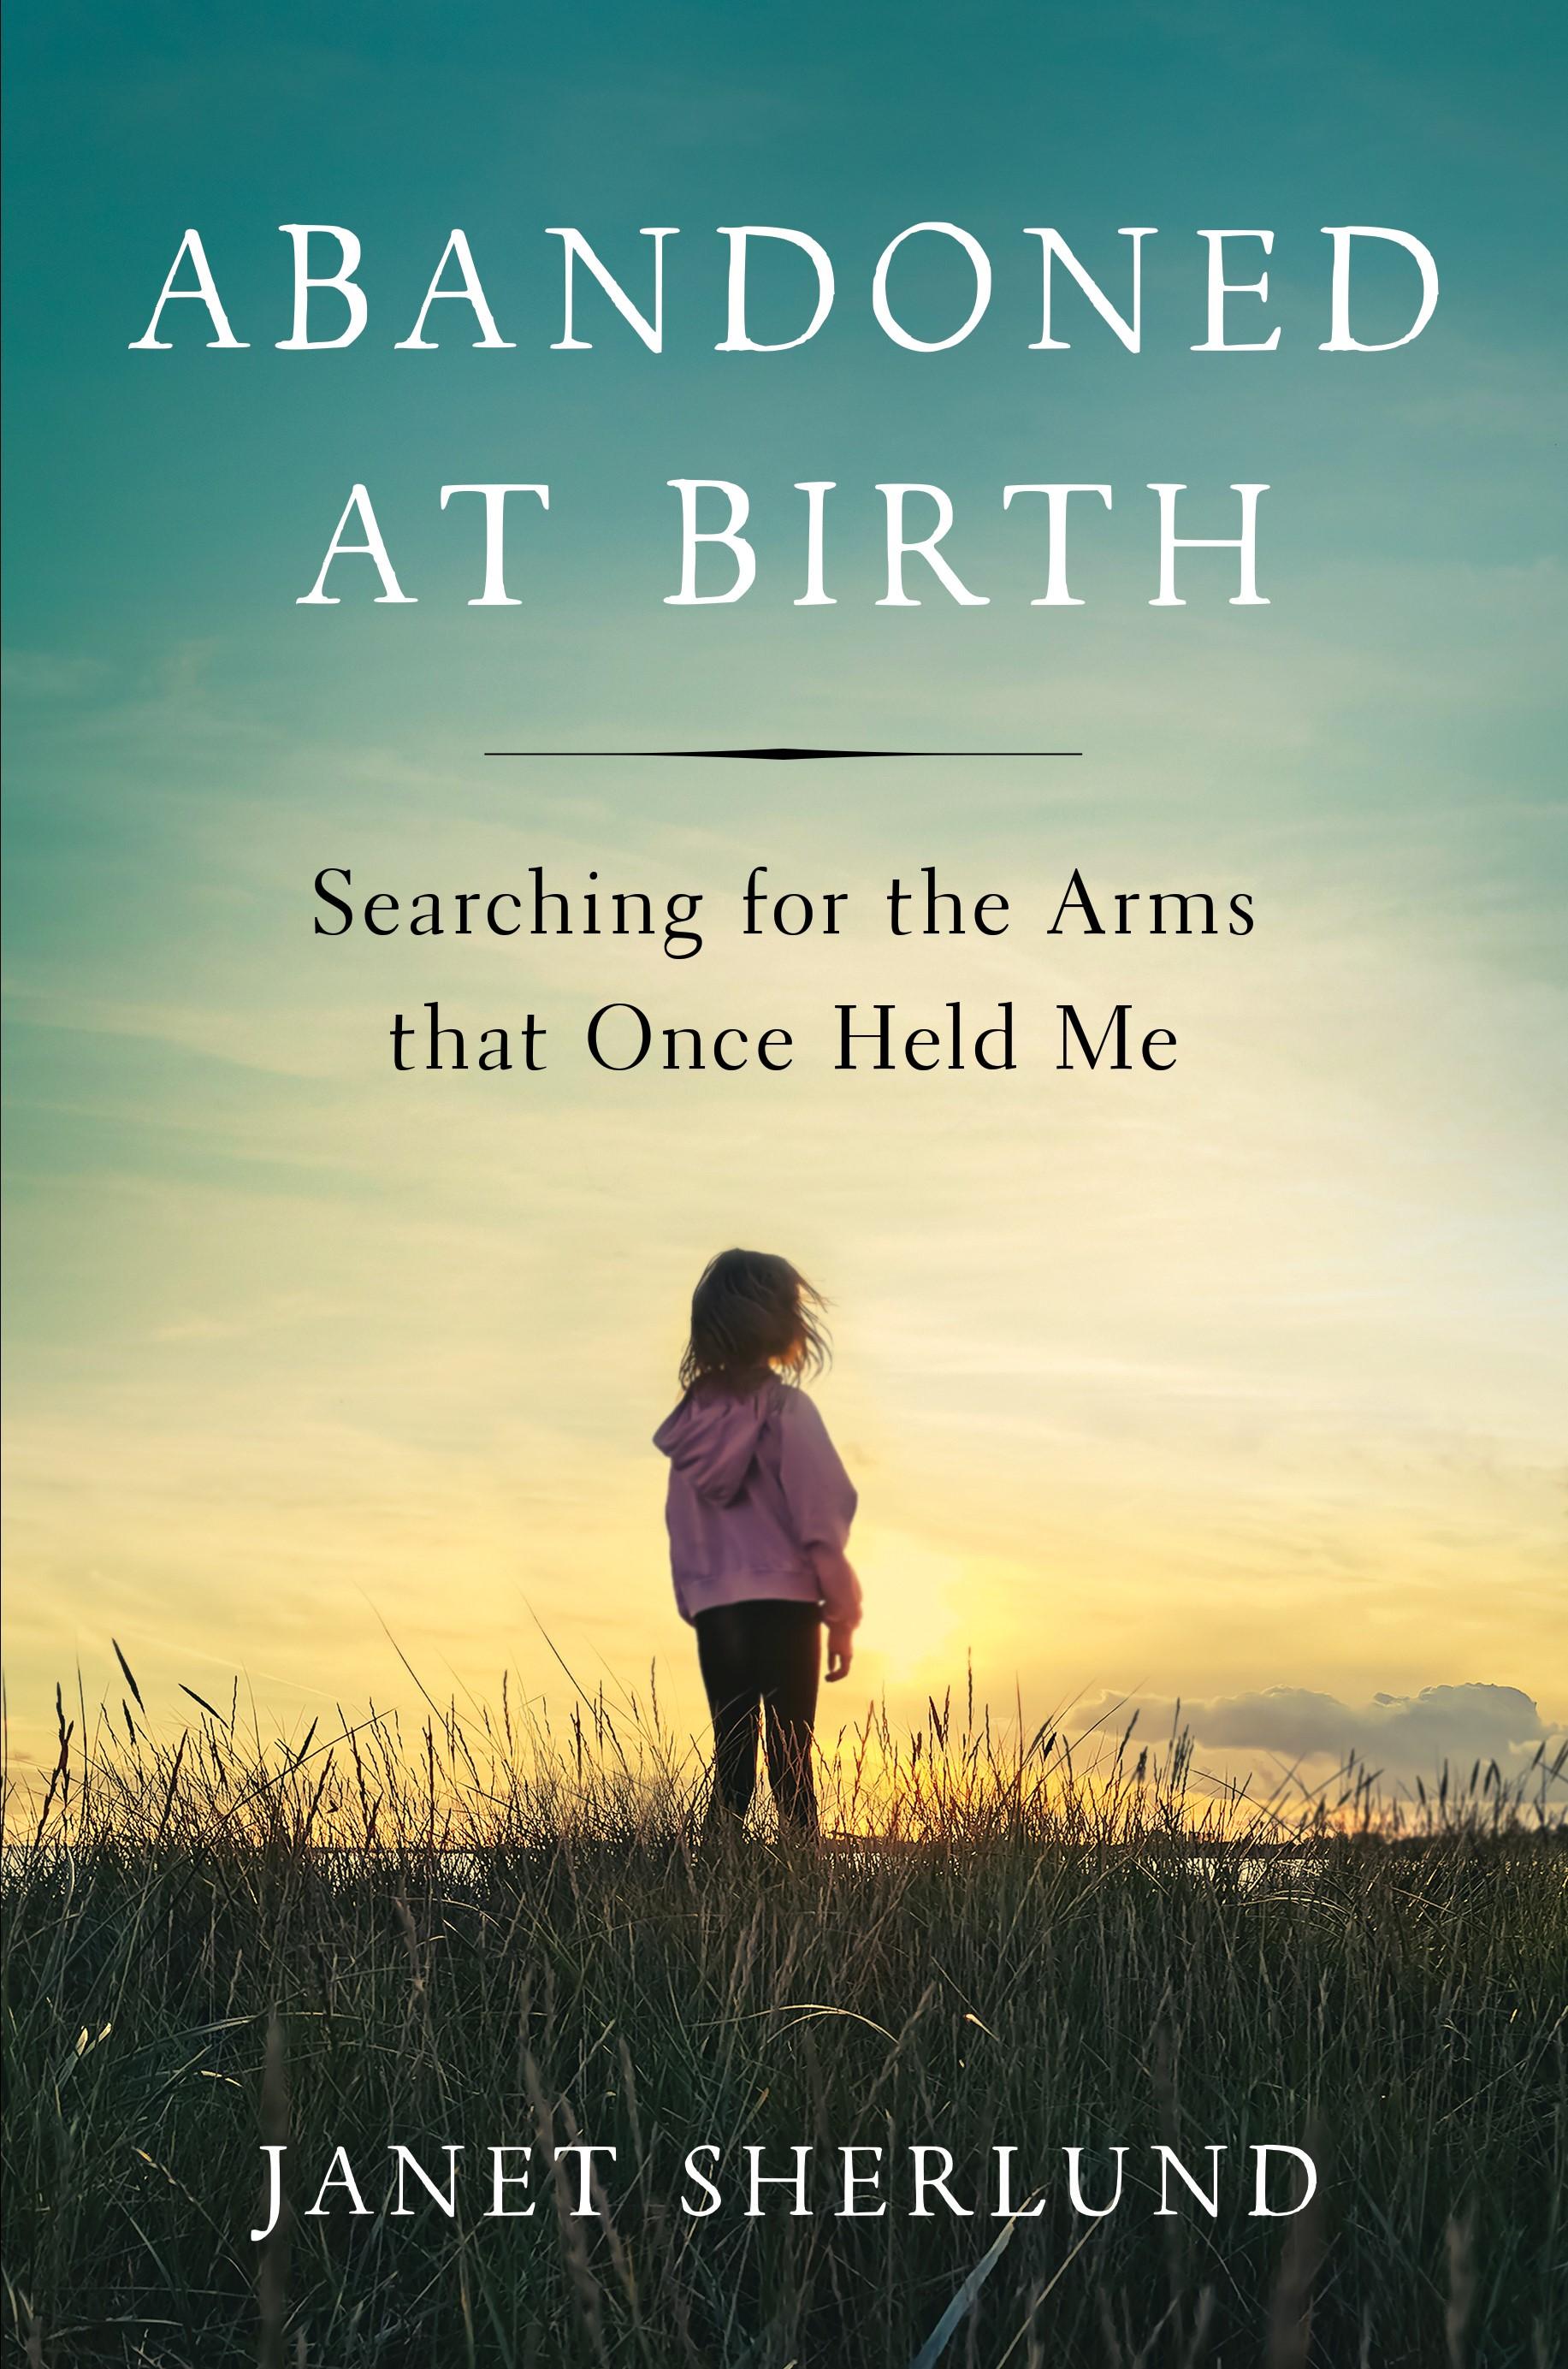 ABANDONED AT BIRTH Paints Vivid Portrait of the Detachment and Longing of an Adopted Child